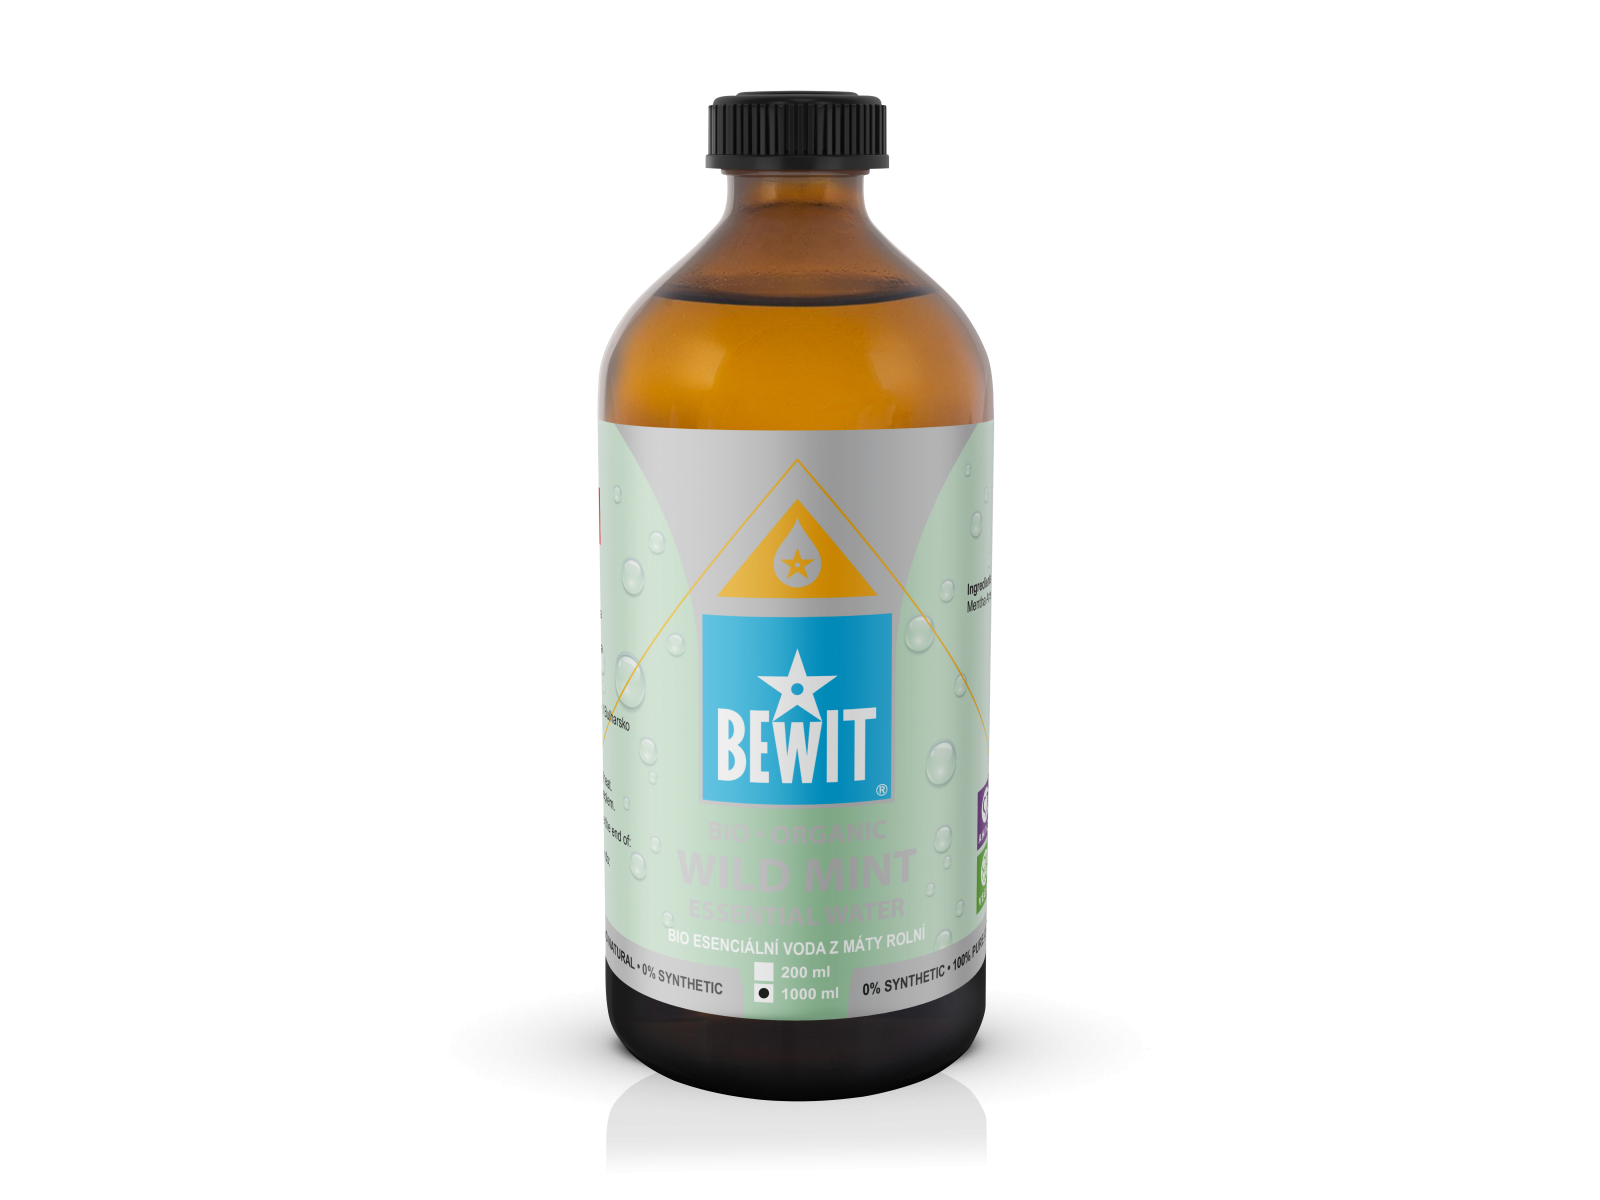 BEWIT Organic mint essential water - 100% NATURAL HYDROLYTE - 2